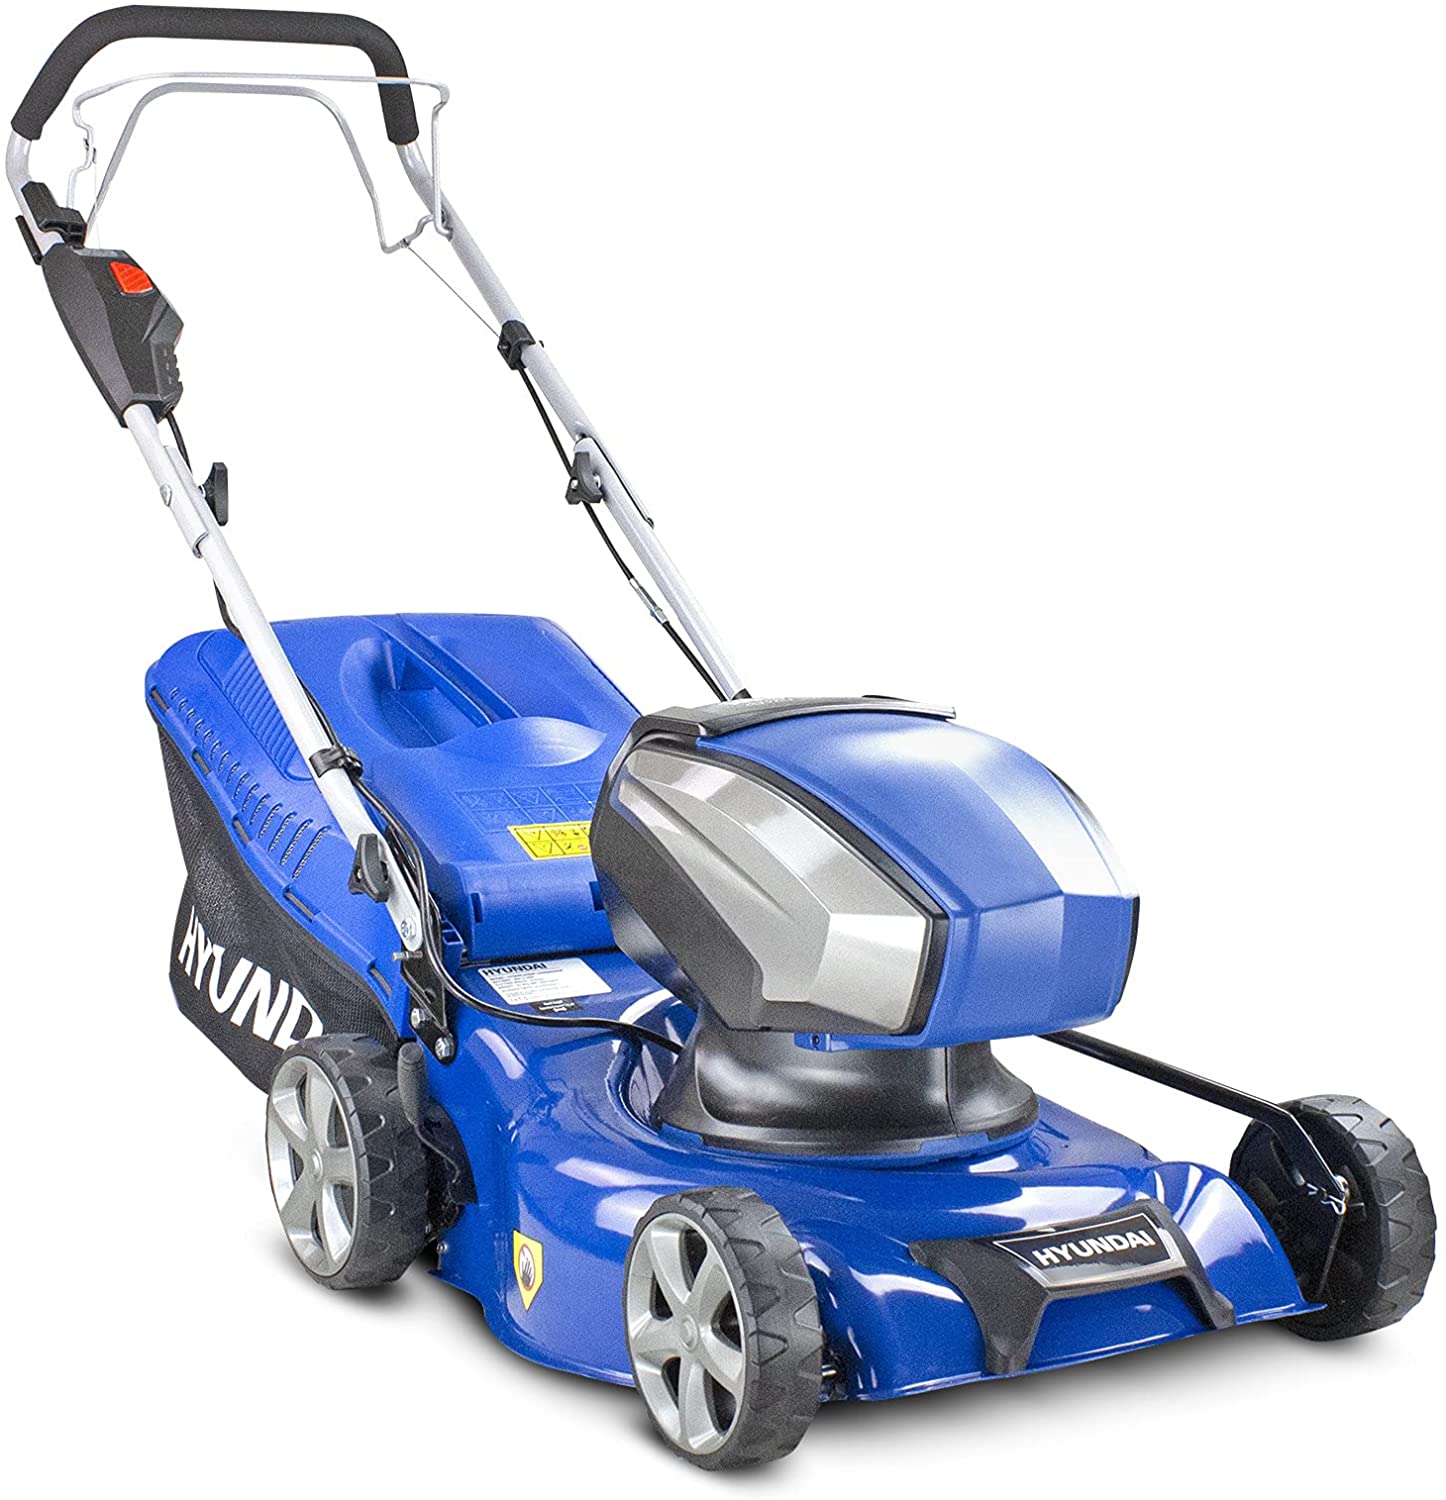 Main view of the Hyundai HYM40Li420SP 40V Rechargeable Lawn Mower.